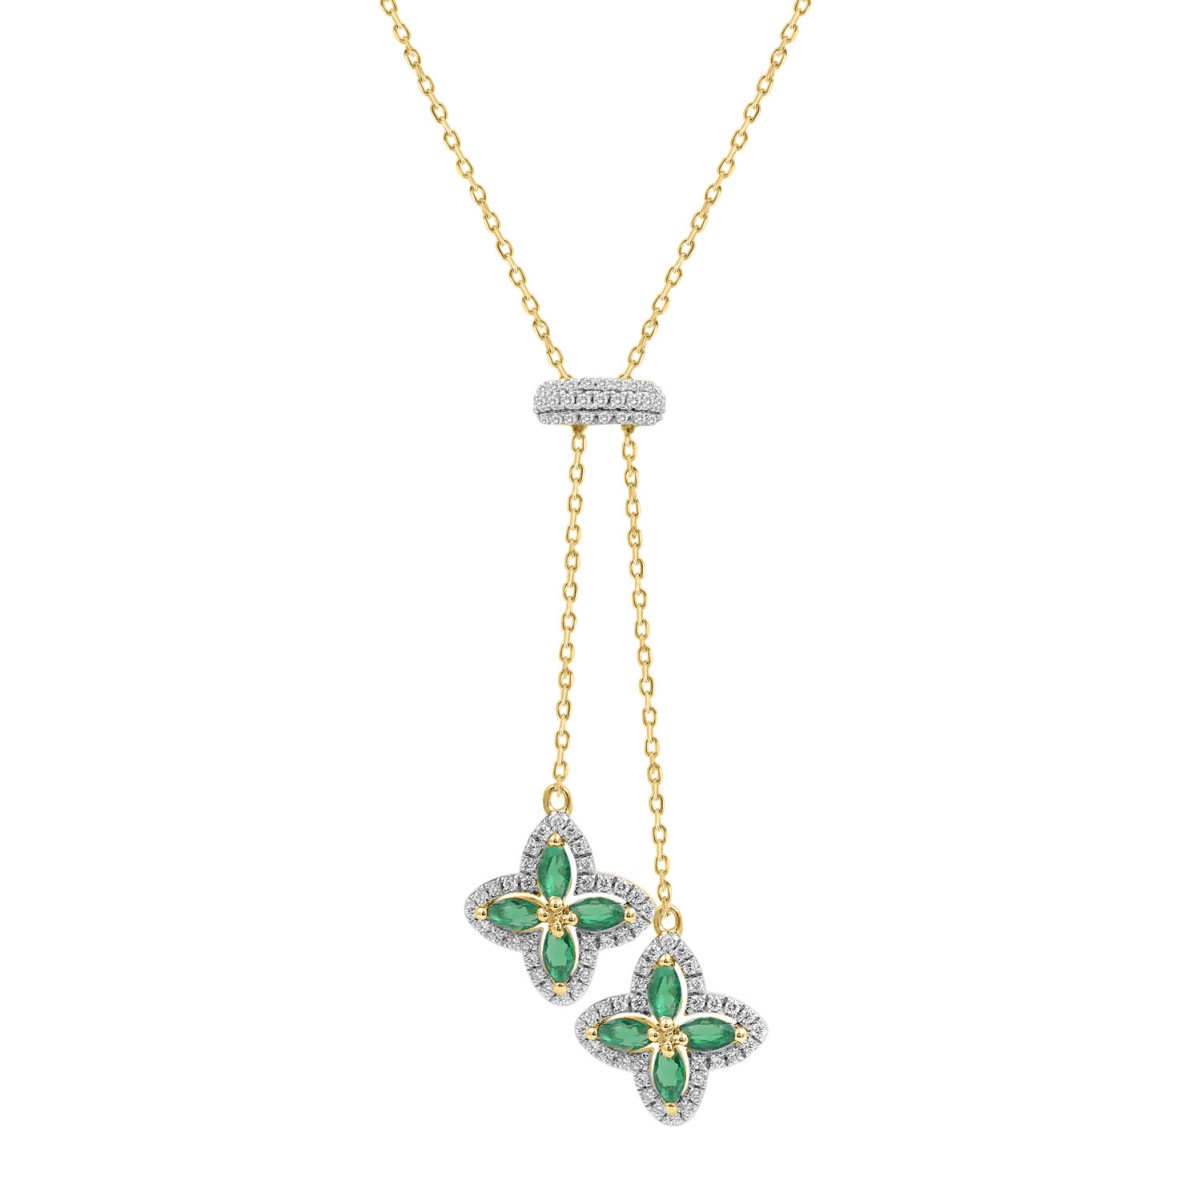 18K YELLOW GOLD 1 1/3CT ROUND/MARQUISE DIAMOND LADIES NECKLACE(COLOR STONE MARQUISE GREEN EMERALD DIAMOND 7/8CT)